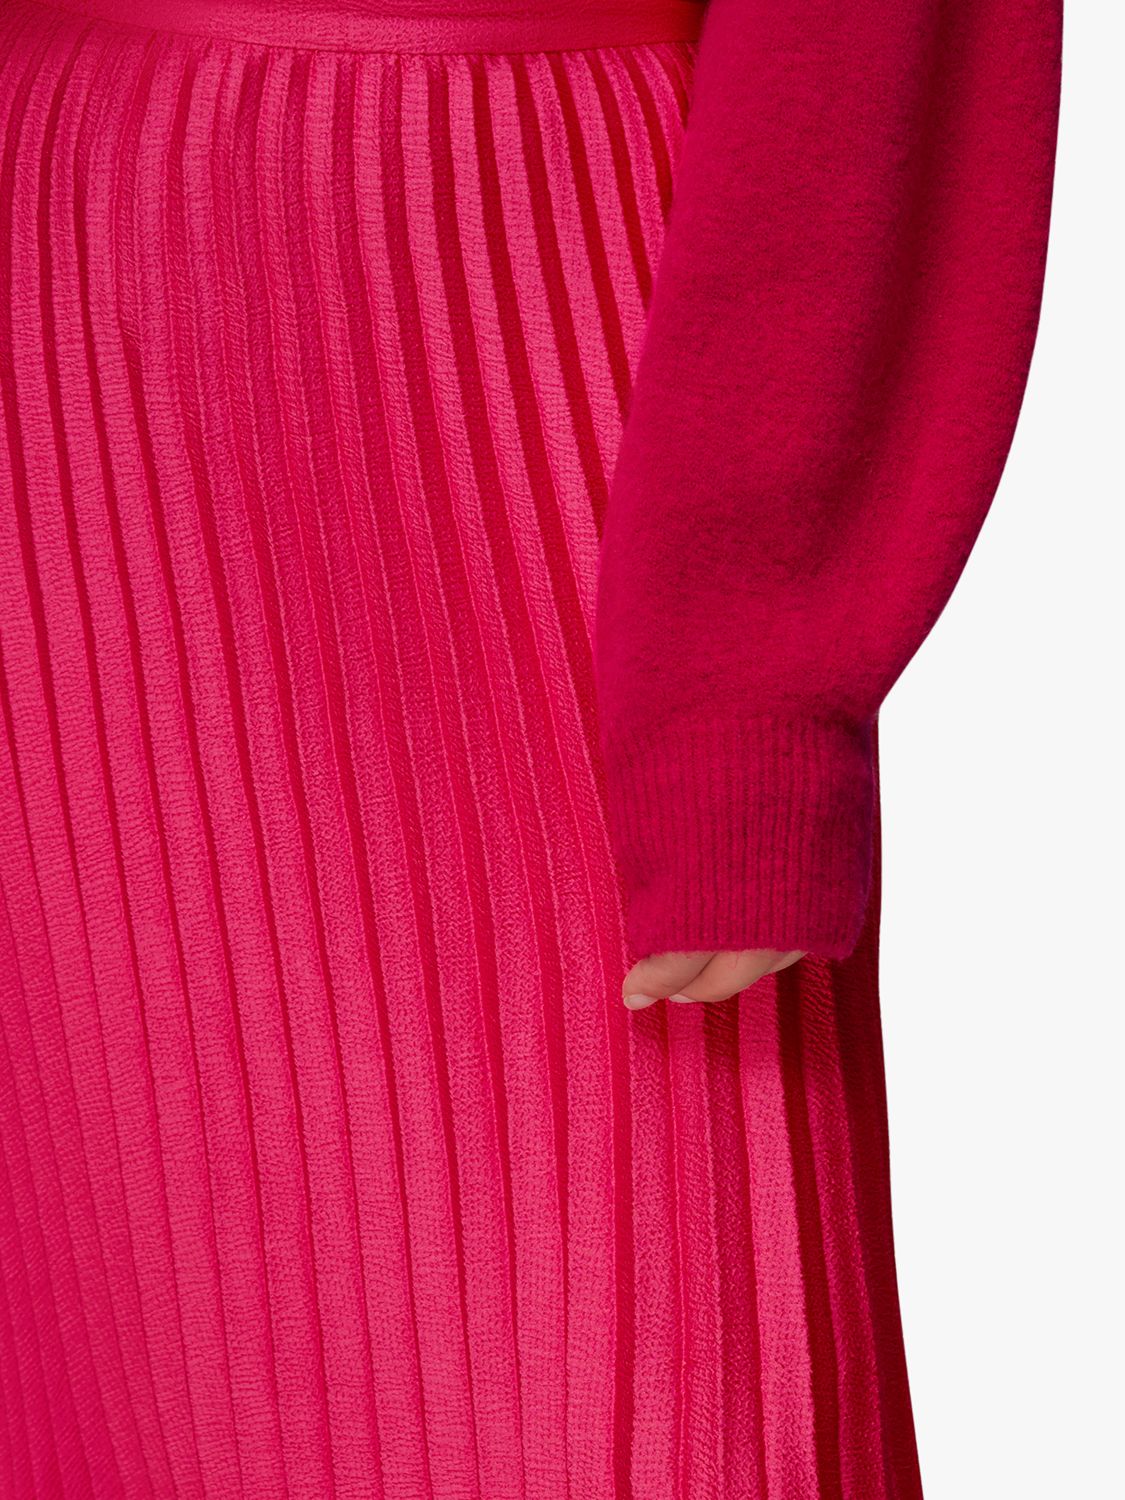 Whistles Katie Pleated Skirt, Pink at John Lewis & Partners